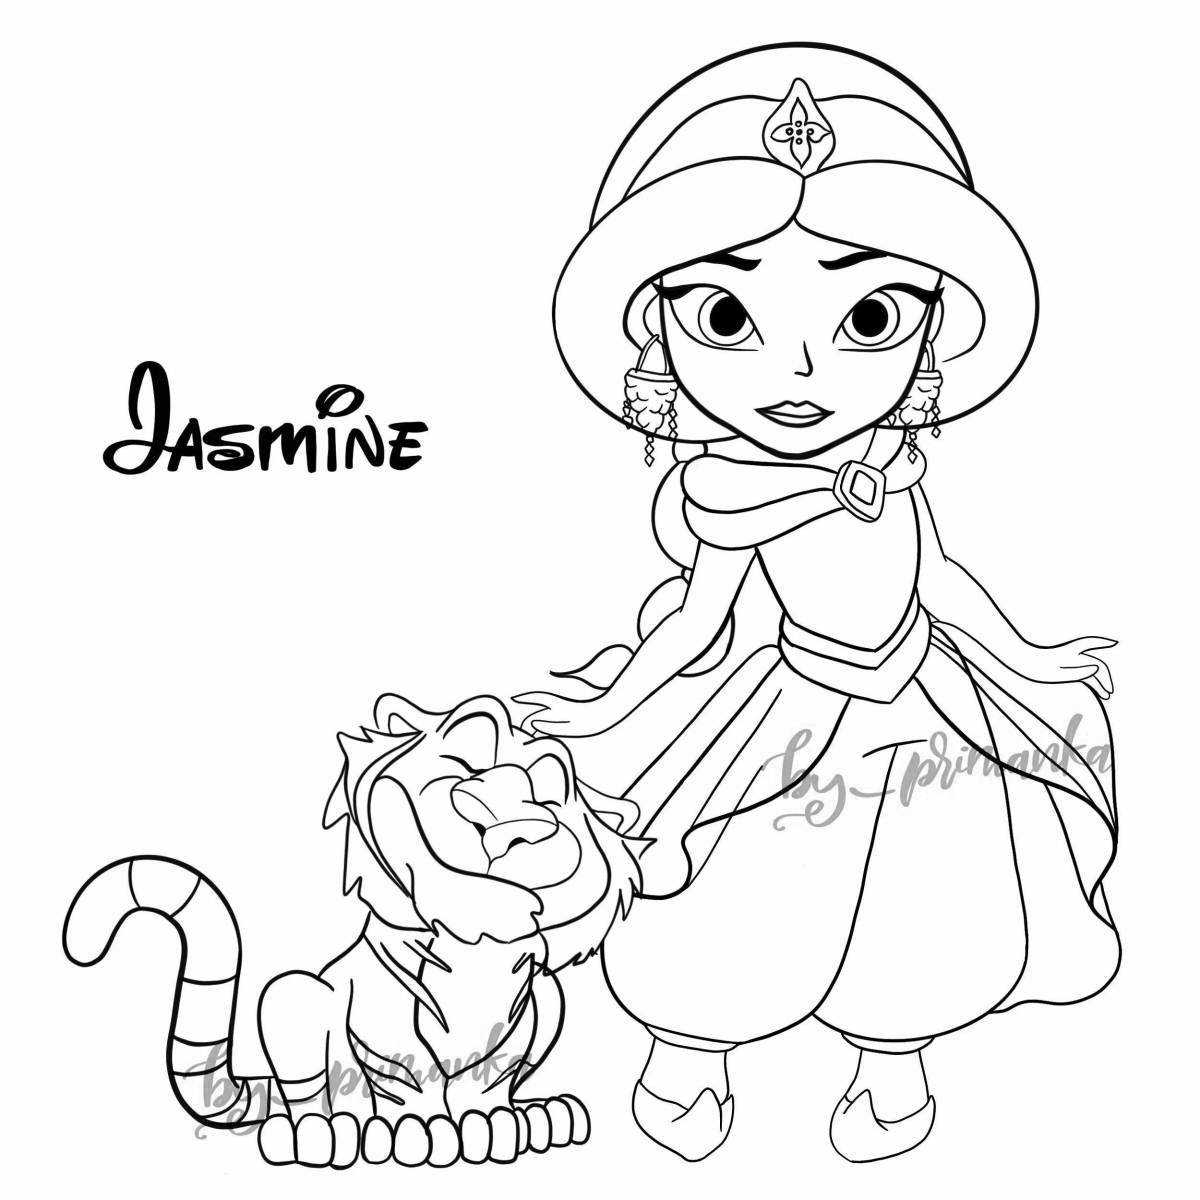 Charming jasmine coloring pages